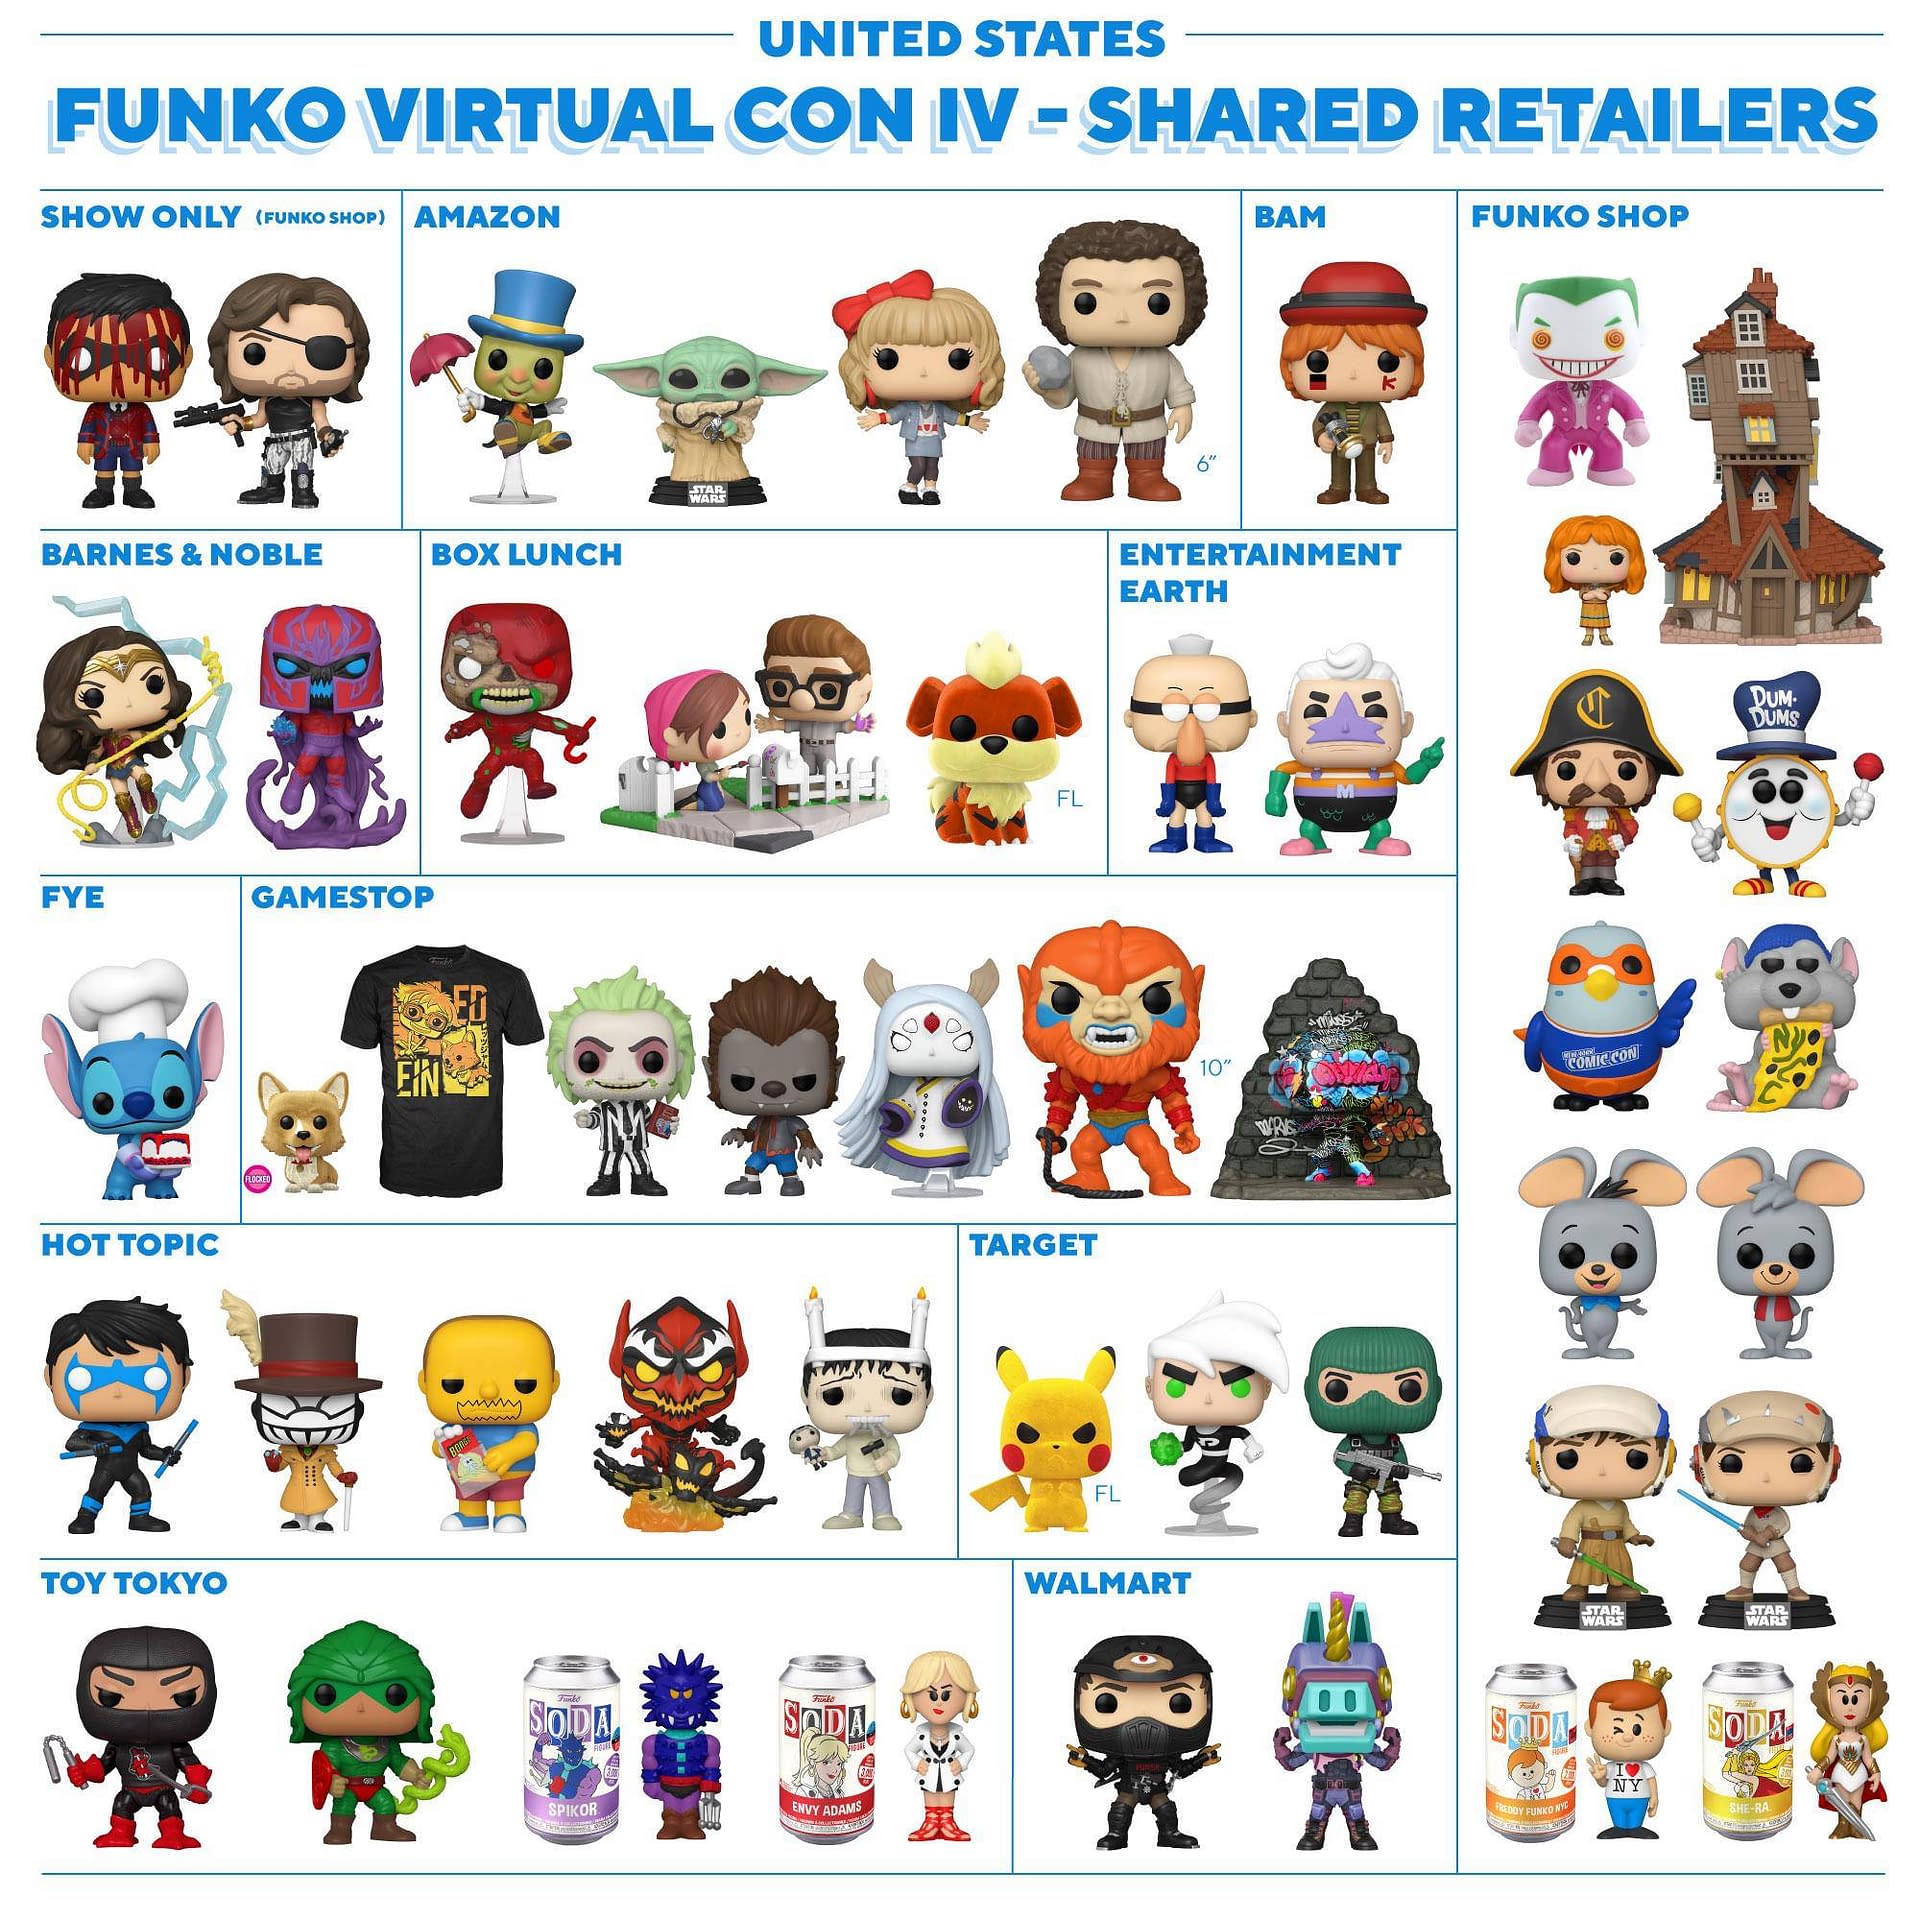 sdcc 2020 shared exclusives for Sale OFF 70